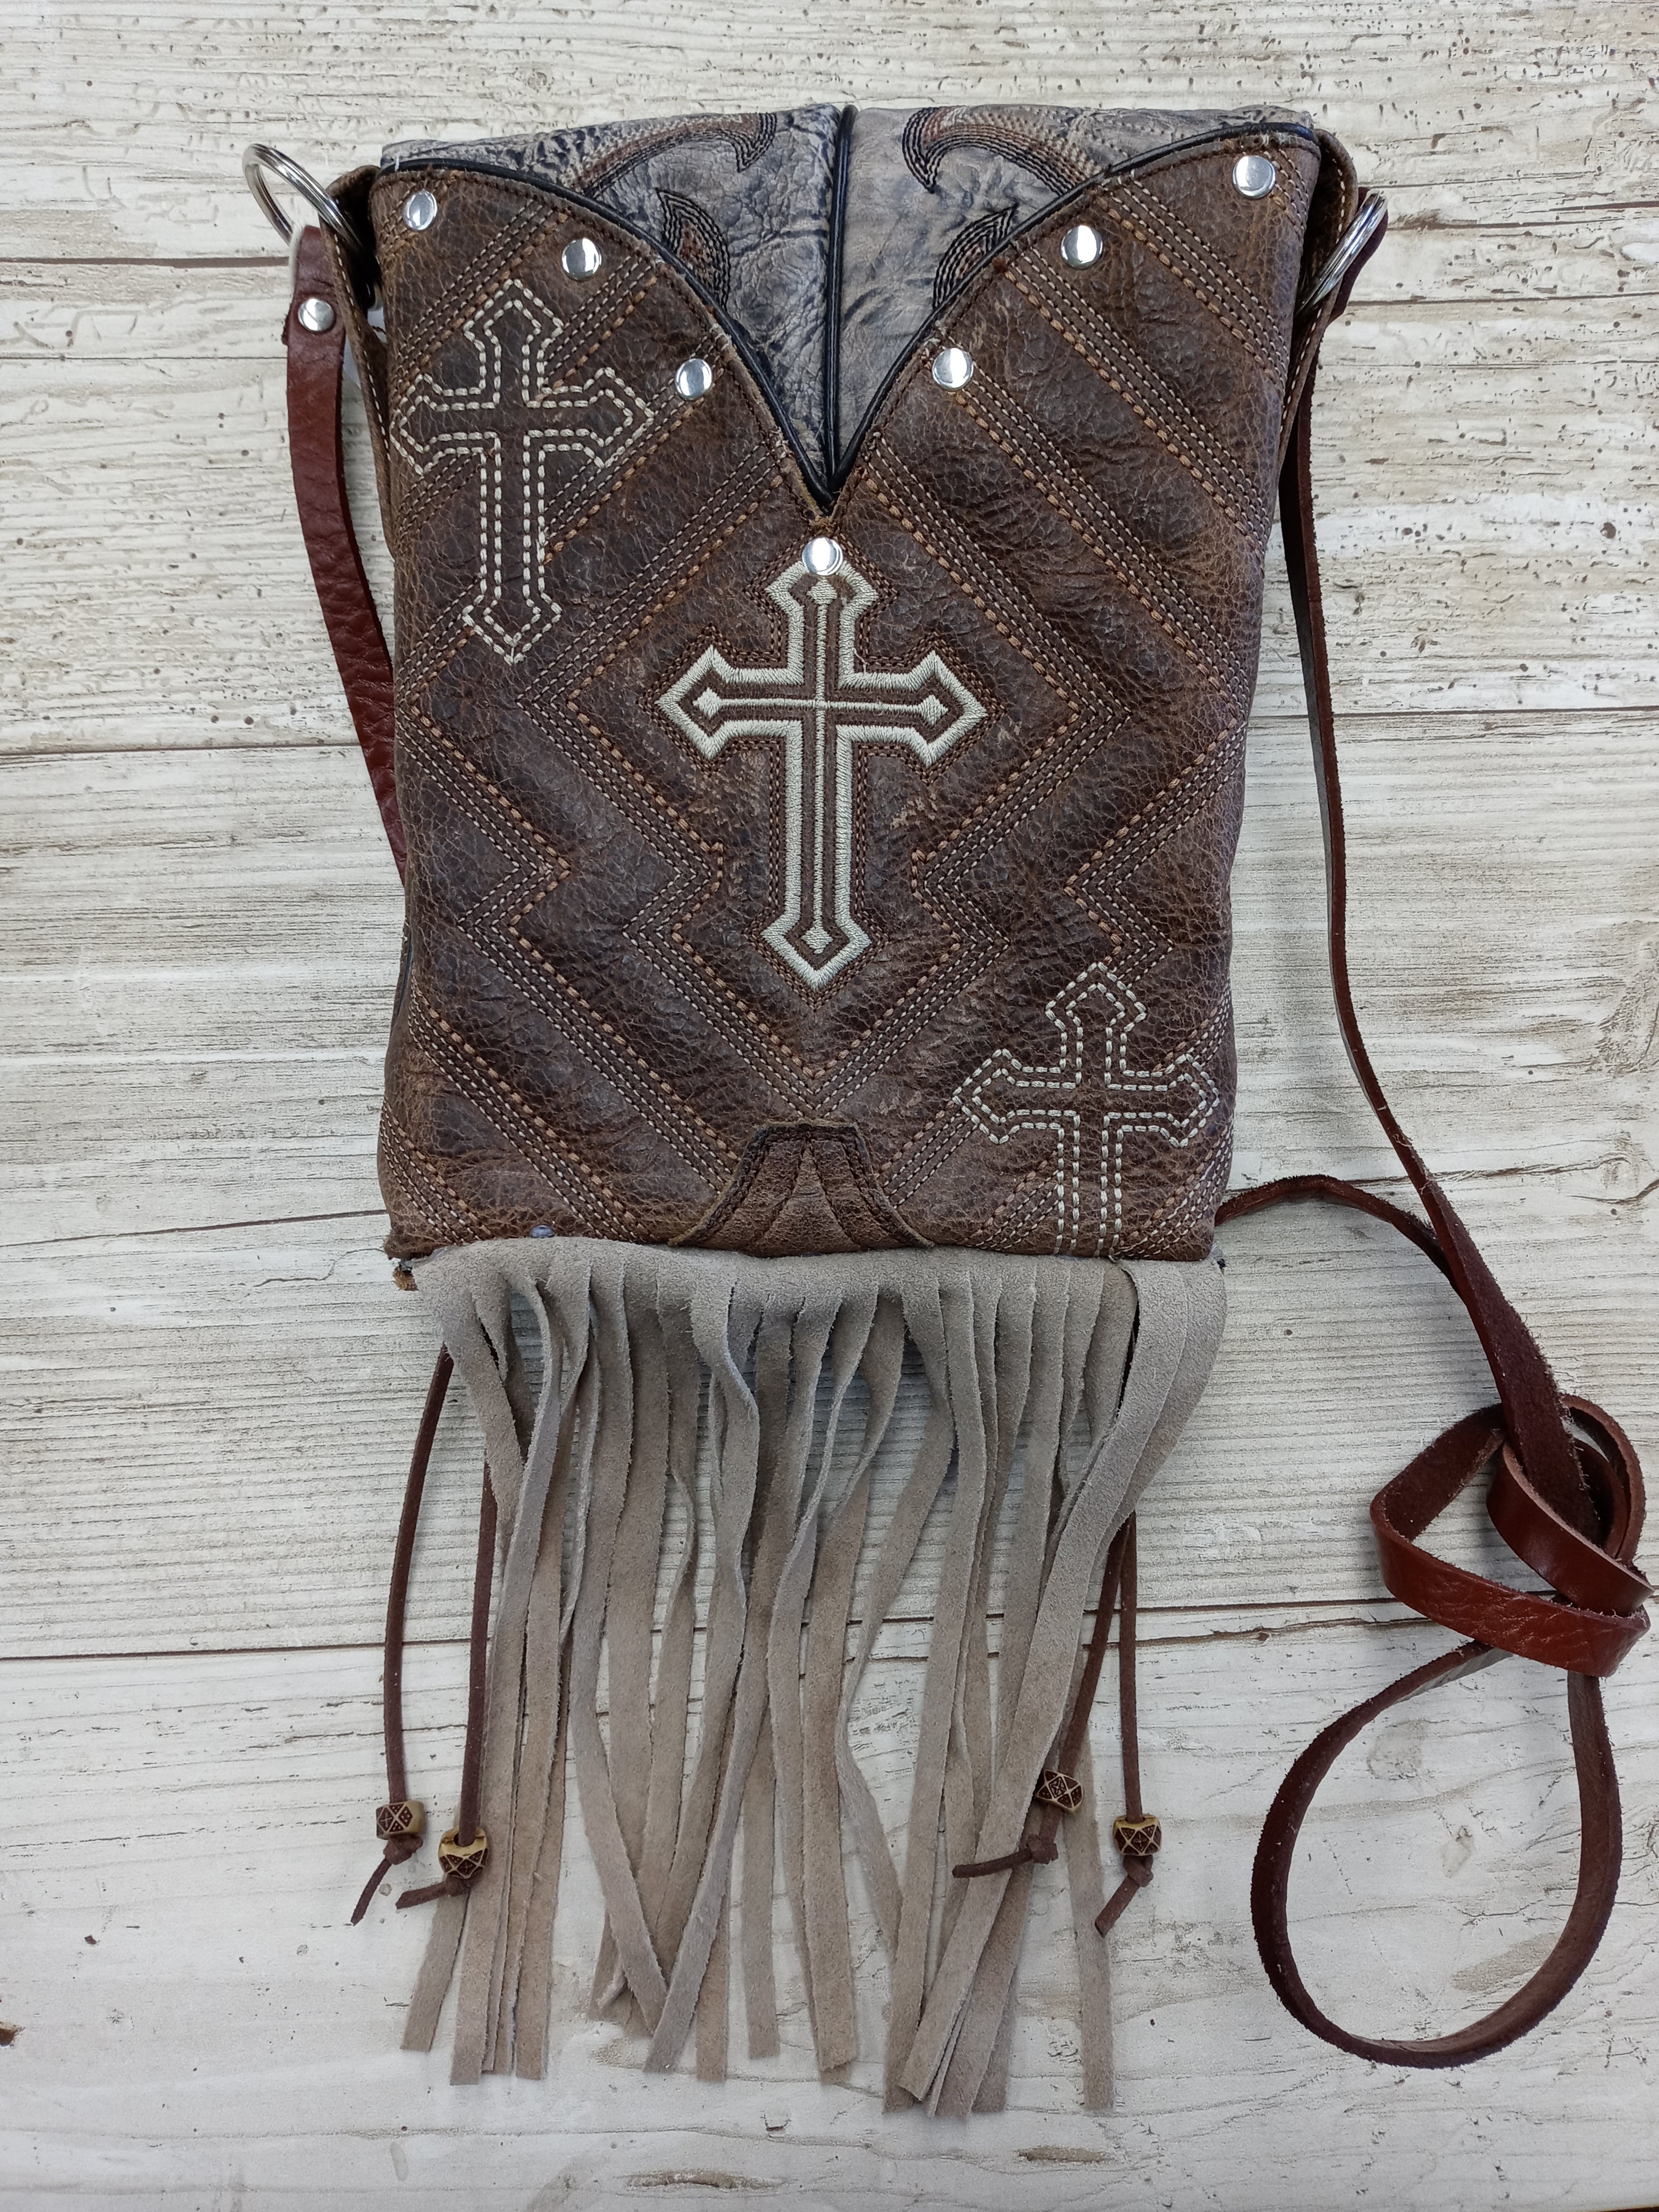 Small Western Purse with Fringe - Cowboy Boot Purse - Small Leather Bag sm154